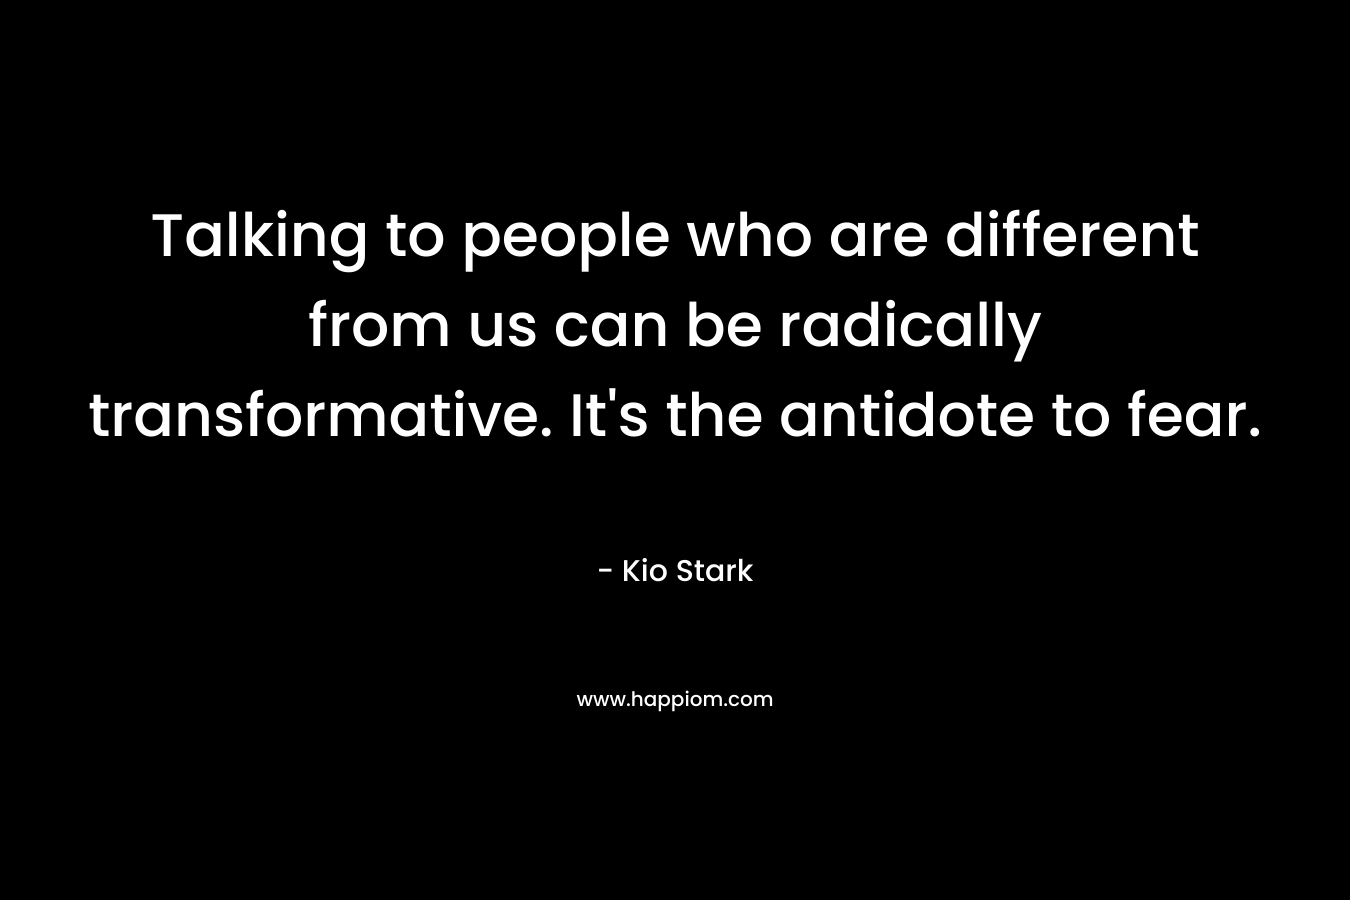 Talking to people who are different from us can be radically transformative. It's the antidote to fear.